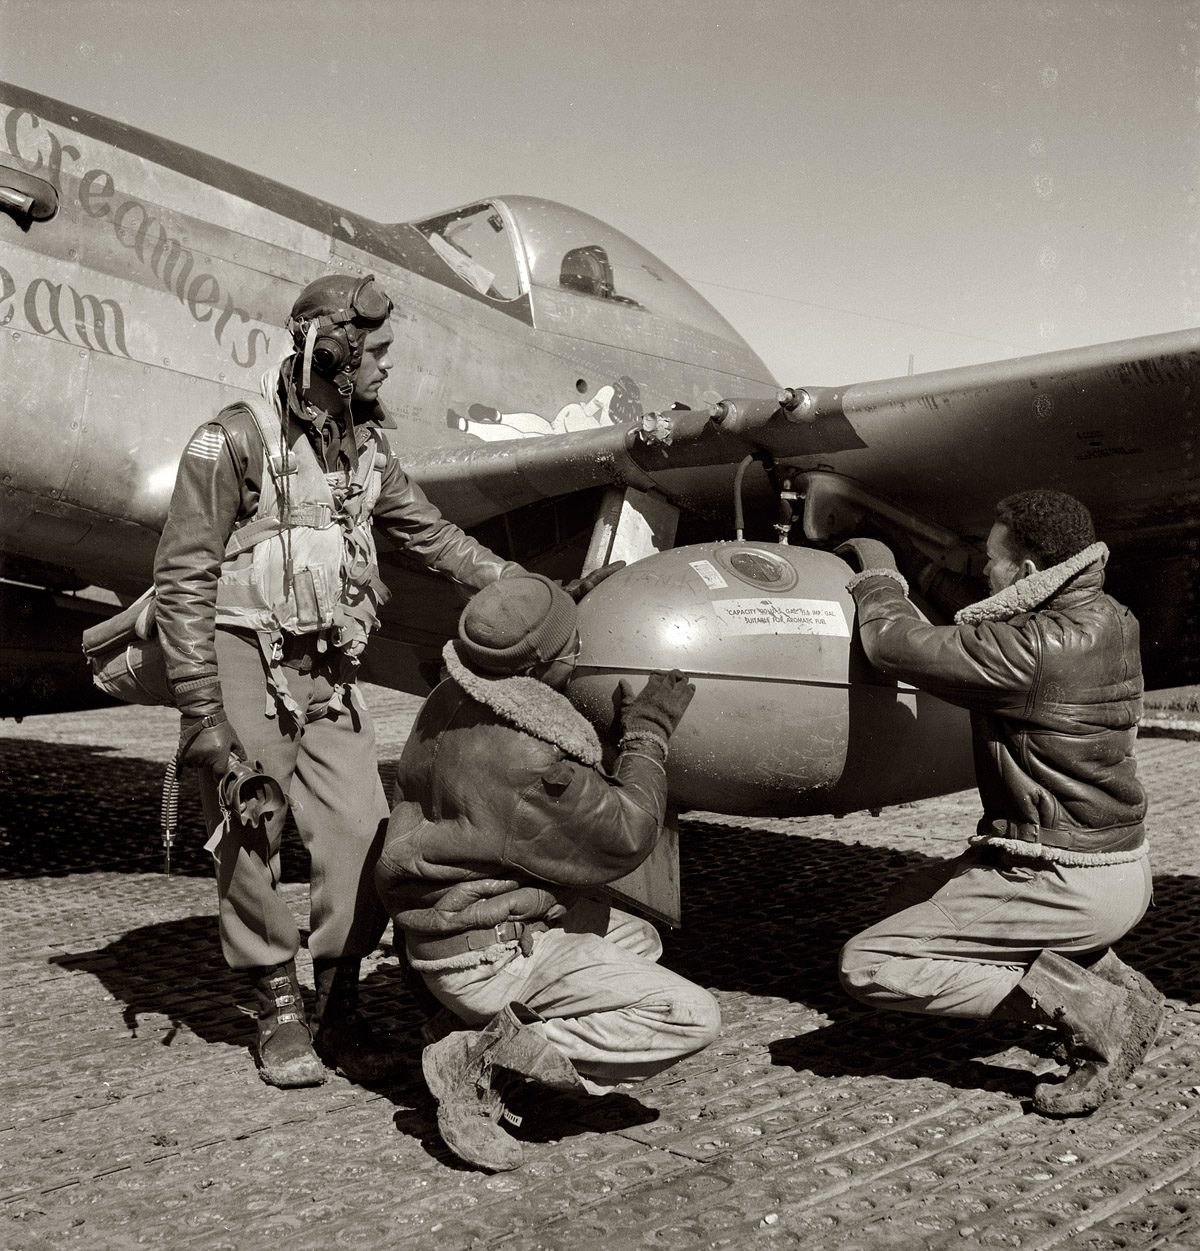 March 1945. Ramitelli, Italy. 332nd Army Air Forces Fighter Group. "Tuskegee airman Edward C. Gleed of Lawrence, Kansas, Class 42-K, with two crewmen adjusting an external 75 gallon drop tank on the wing of the P-51D Creamer's Dream." View full size. Medium format negative by Toni Frissell.